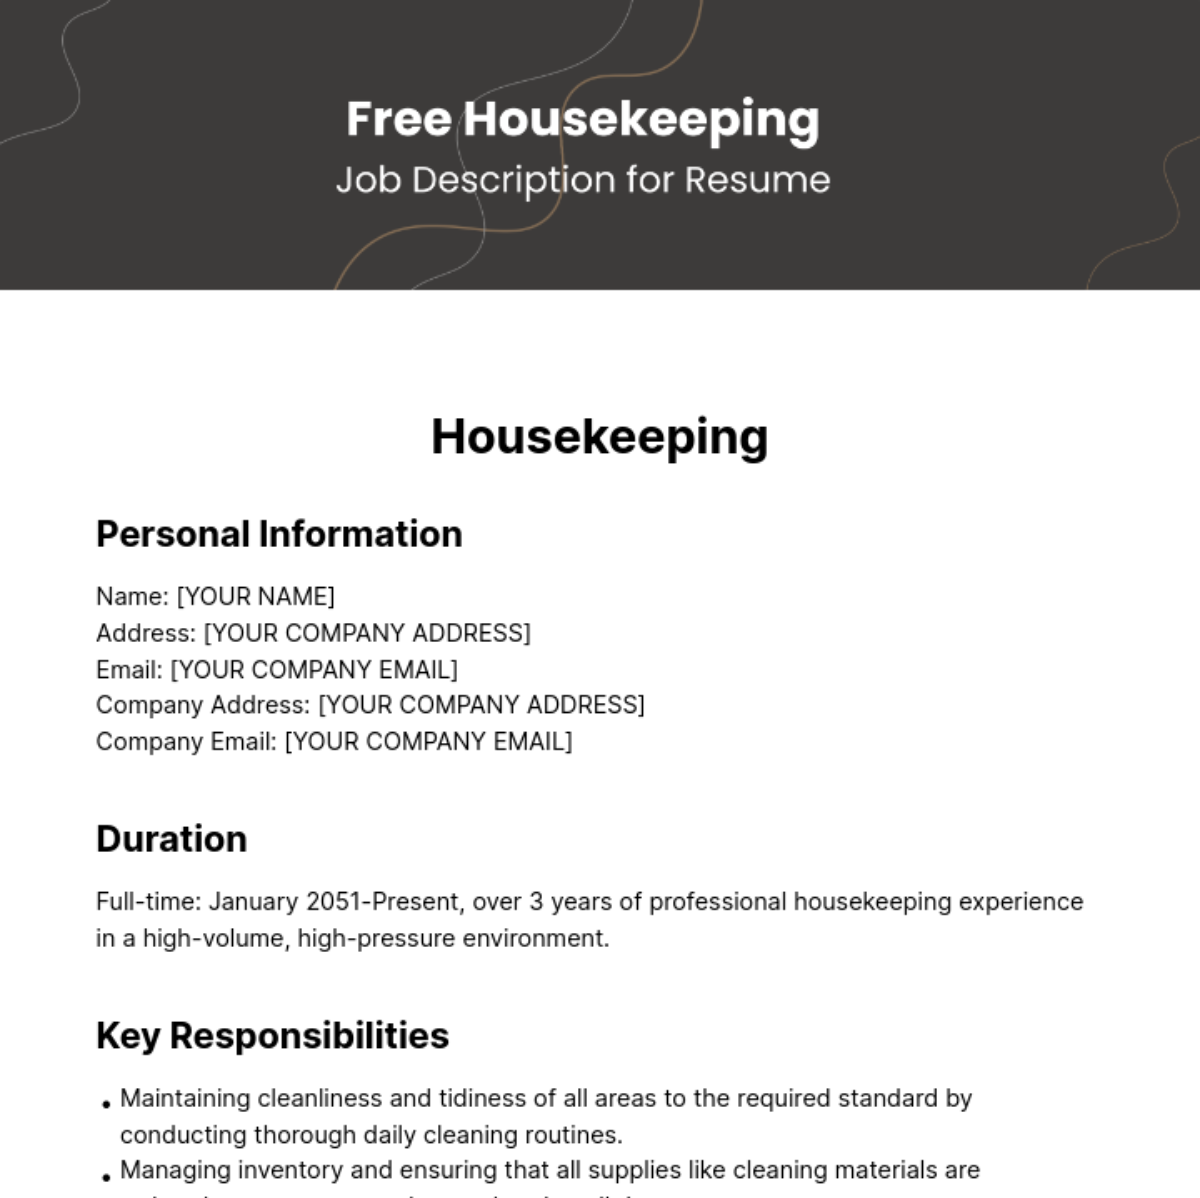 Free Housekeeping Job Description for Resume Template